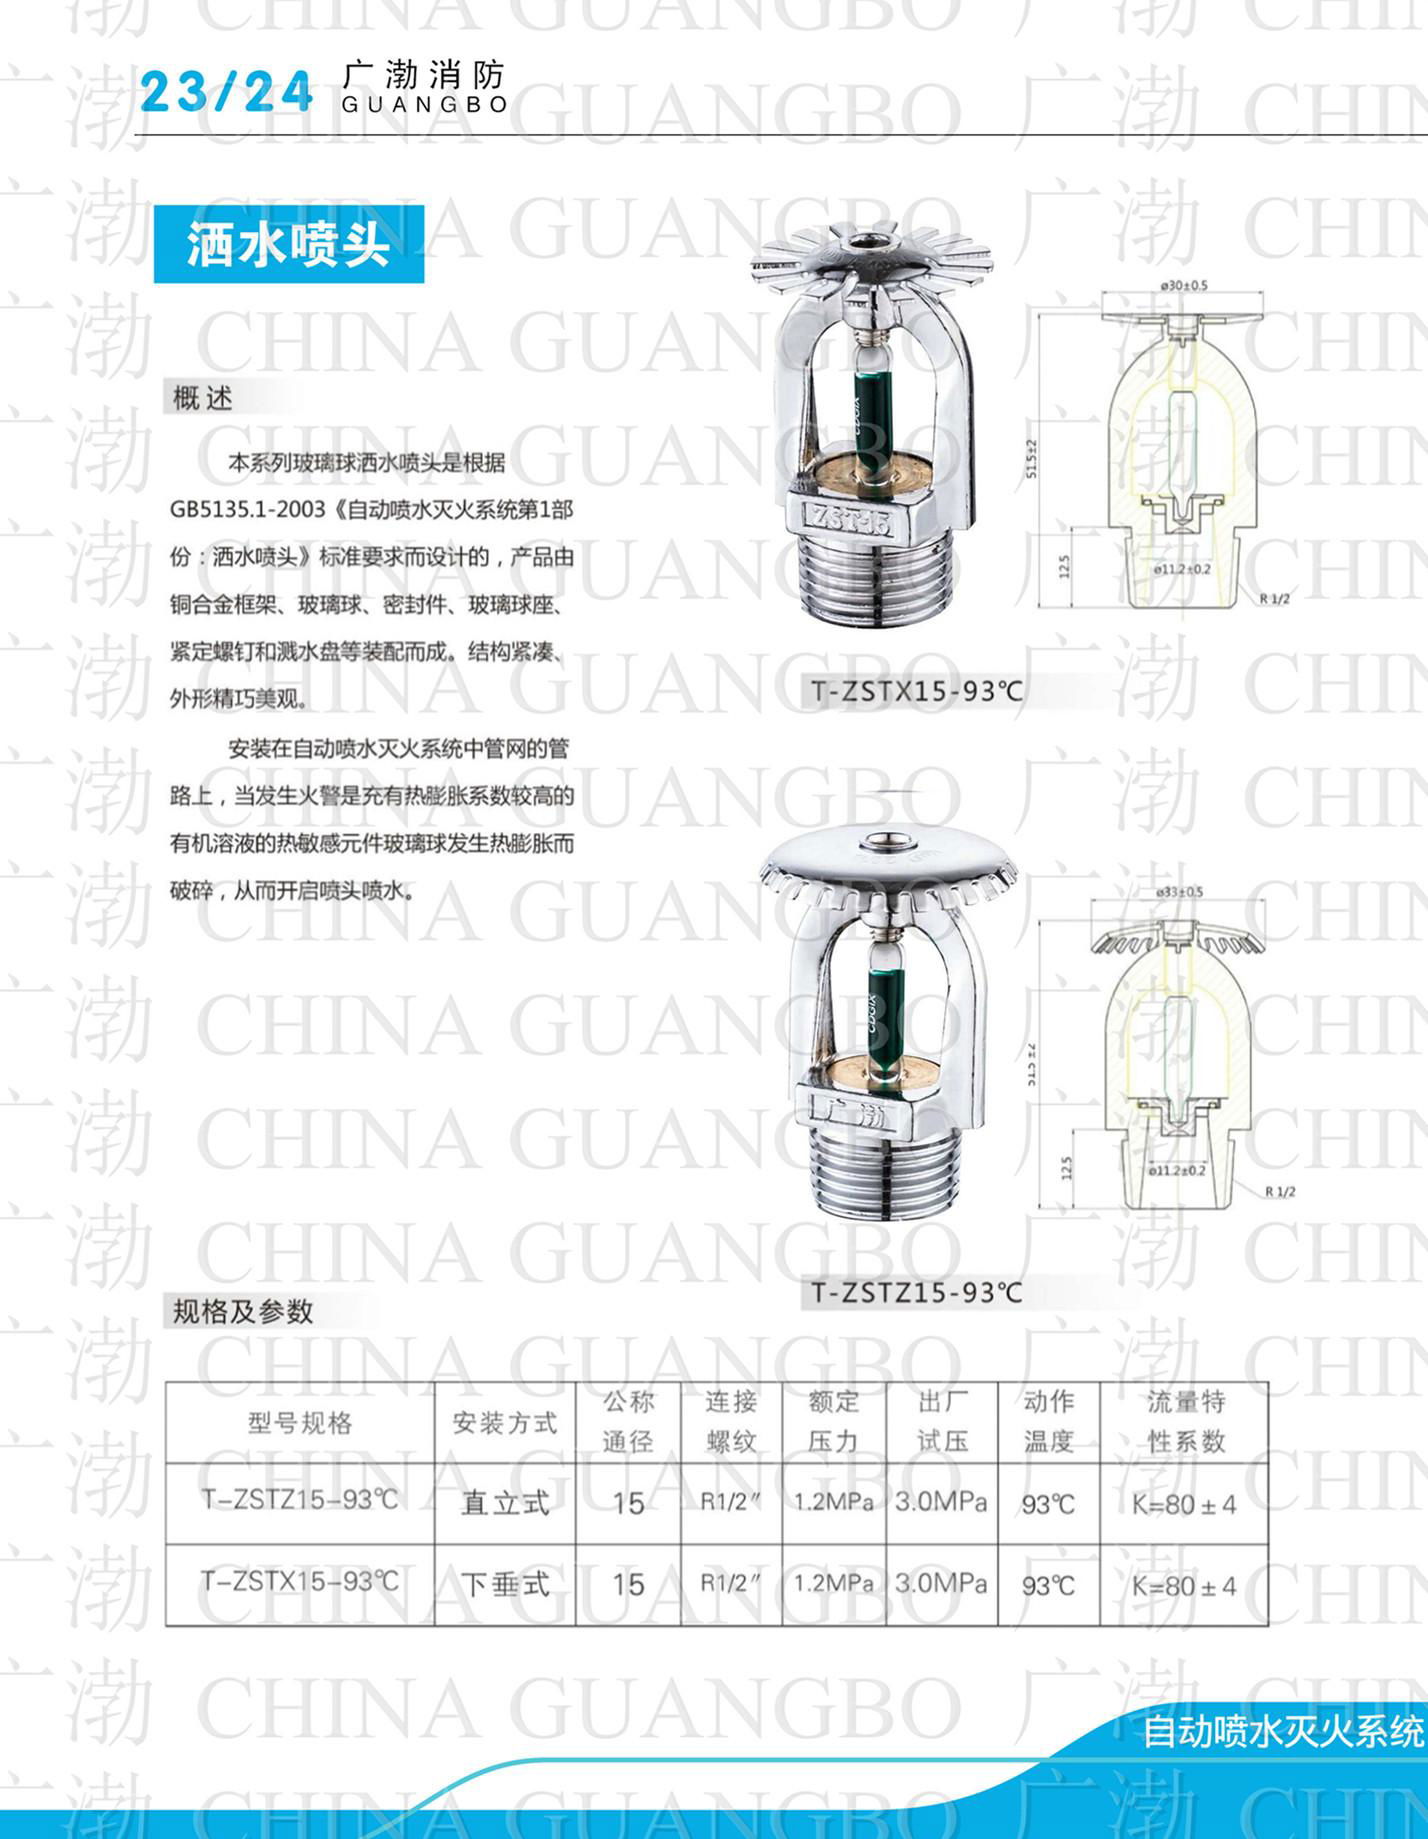 Fire Sprinkler Pendent Upright Sidewall Concealed Type Fujian Guangbo Fighting 3